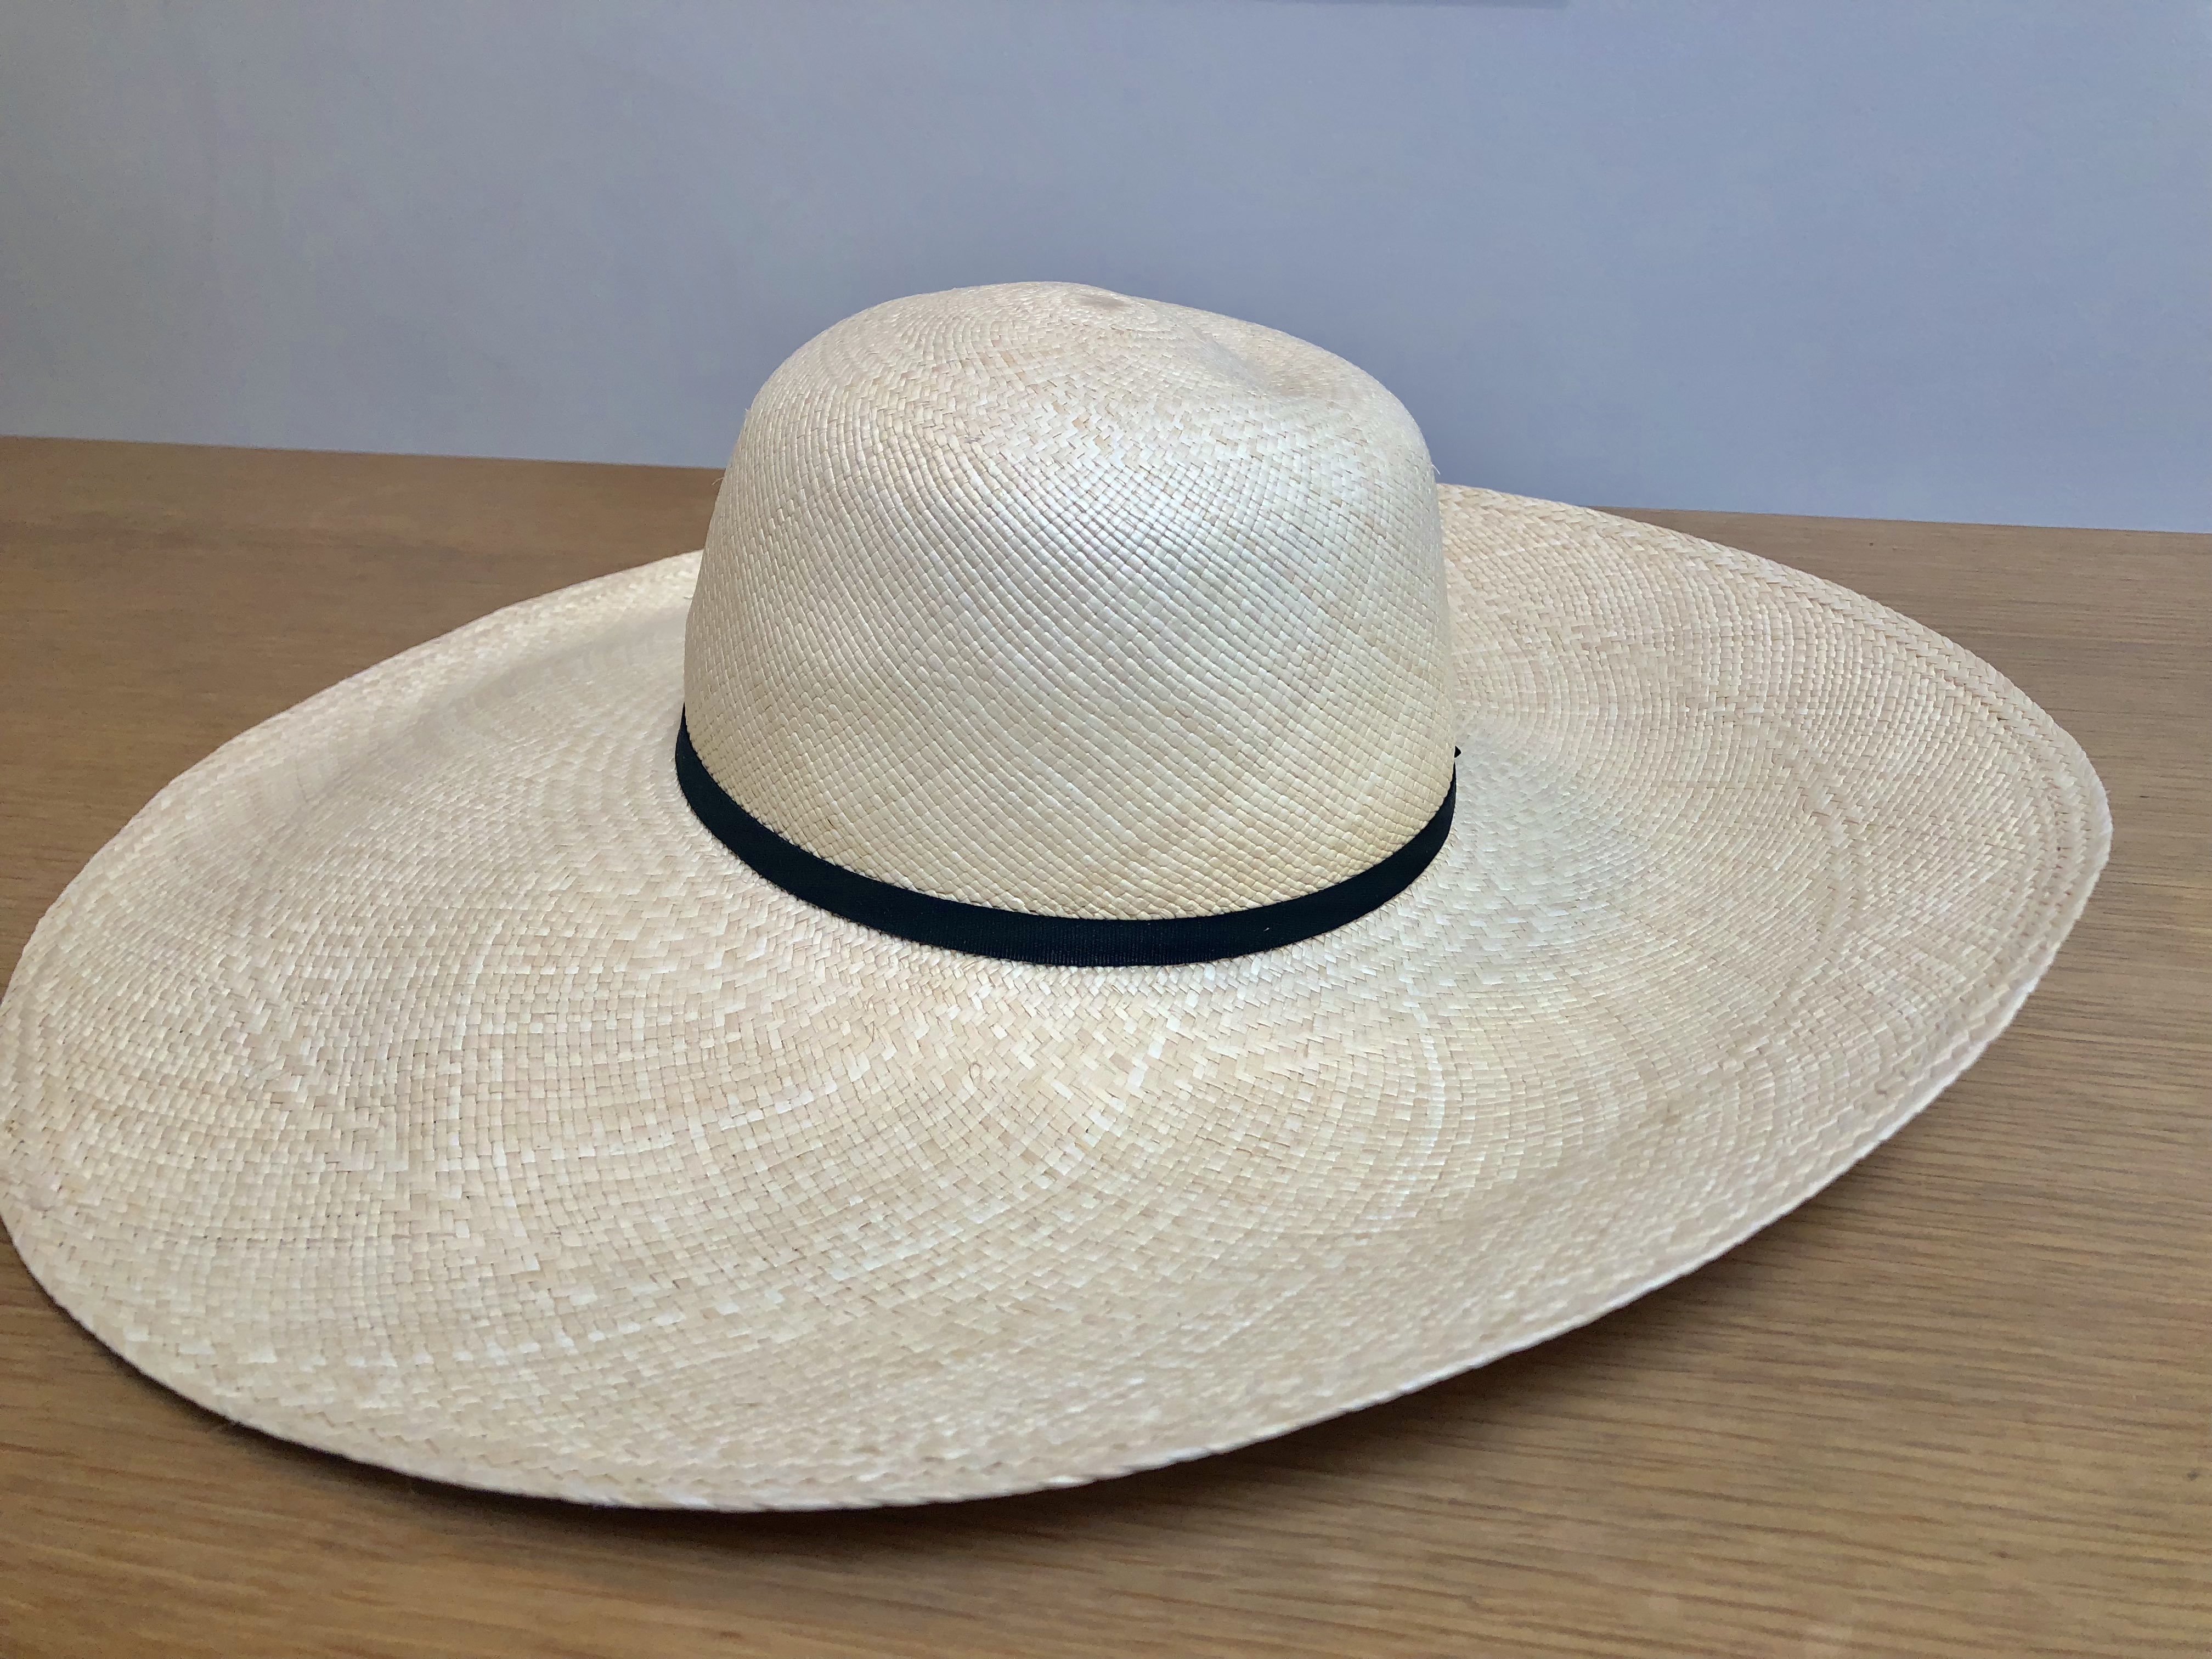 Large brimmed white hat at cuyana